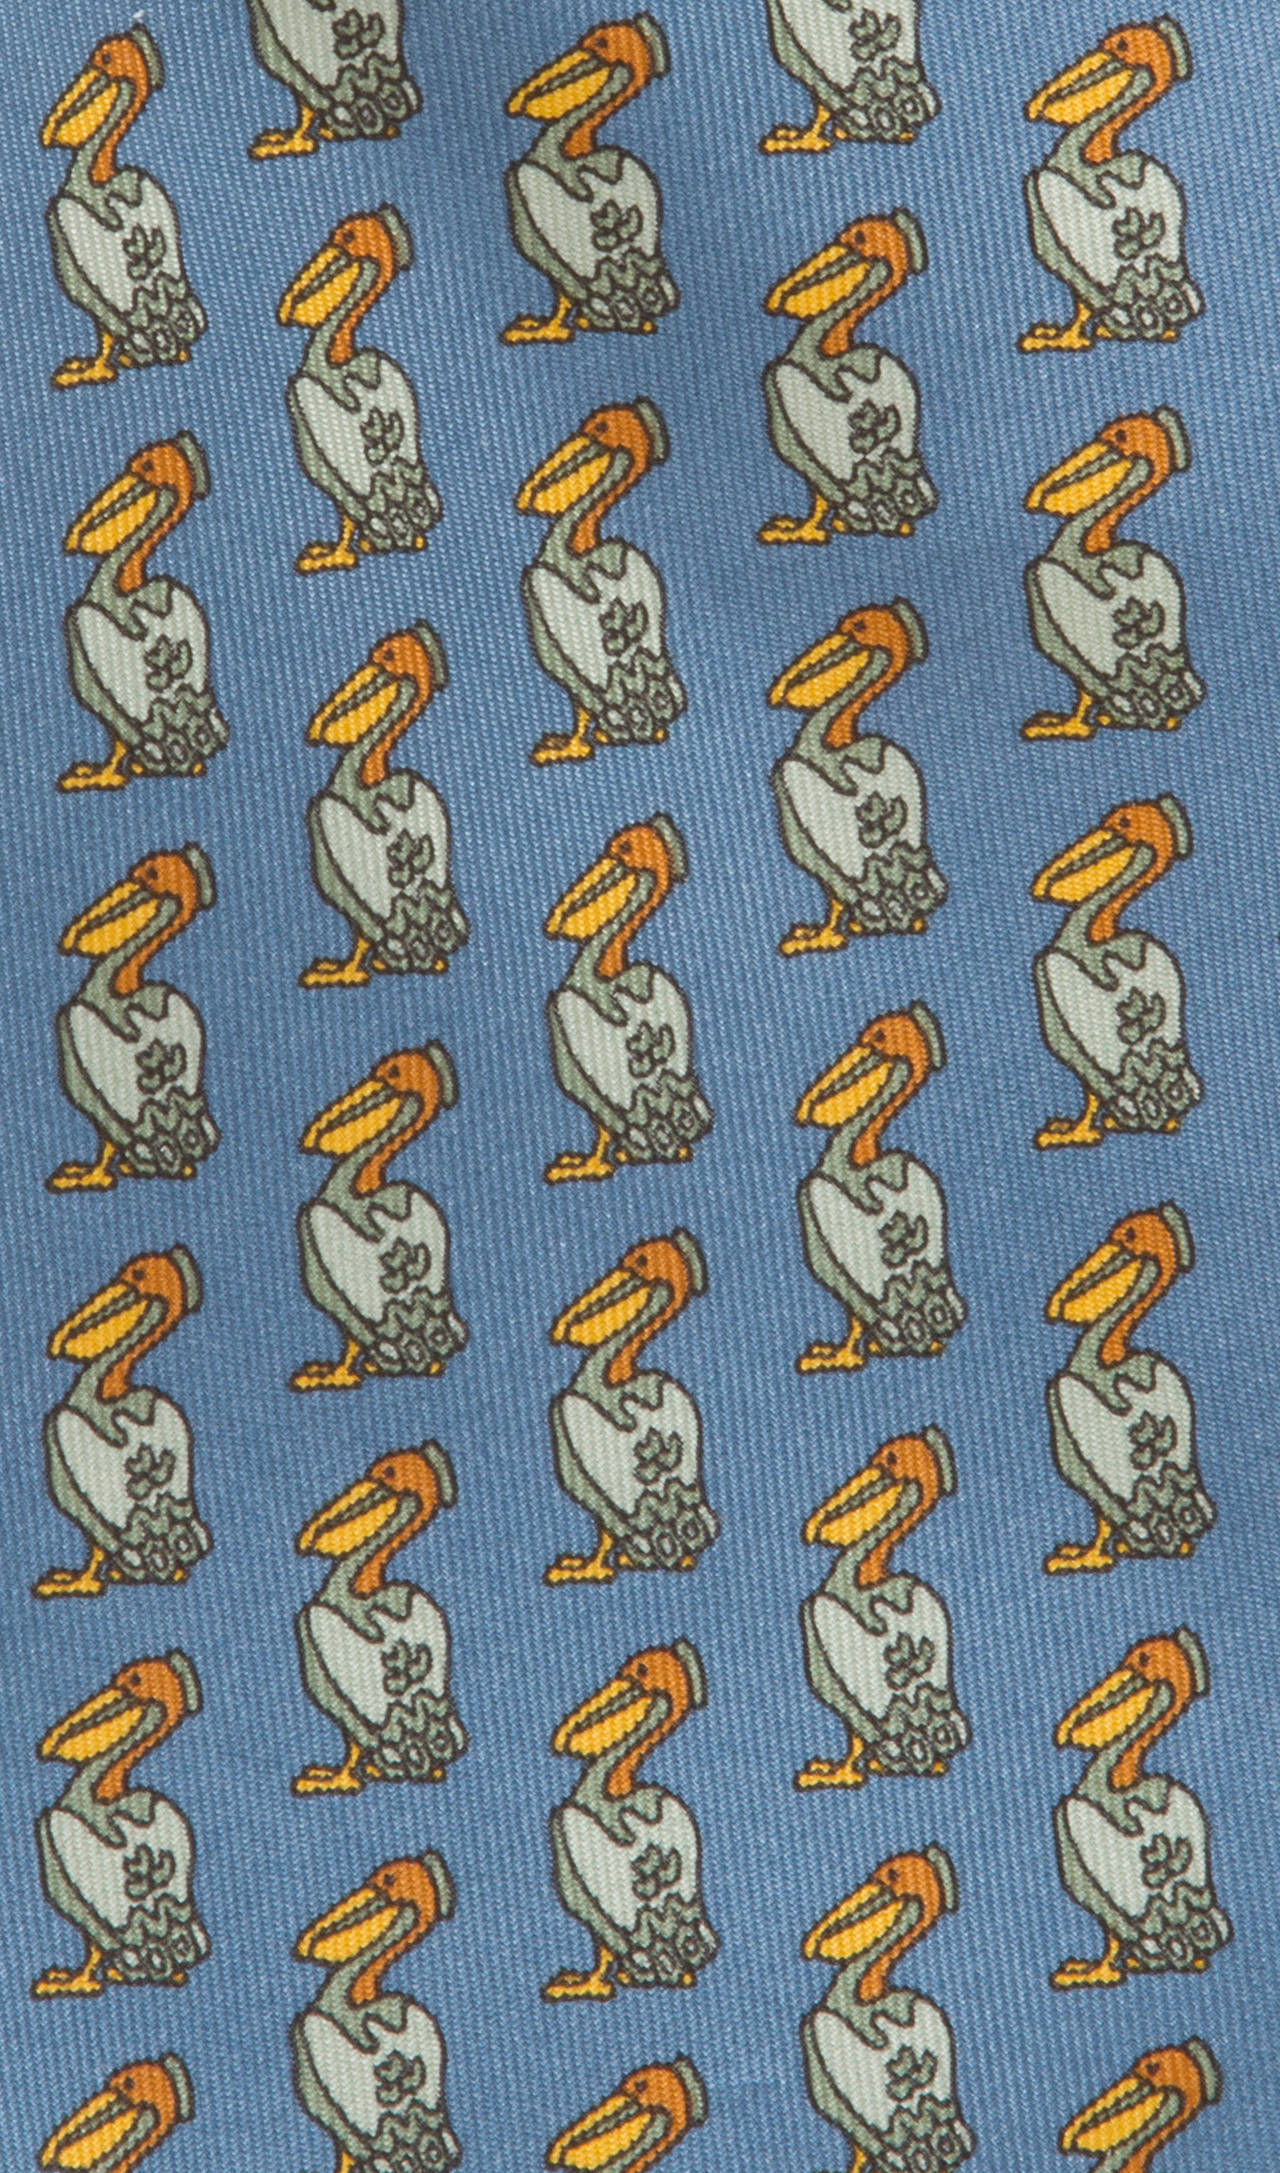 This is a great tie with a playful overall motif.